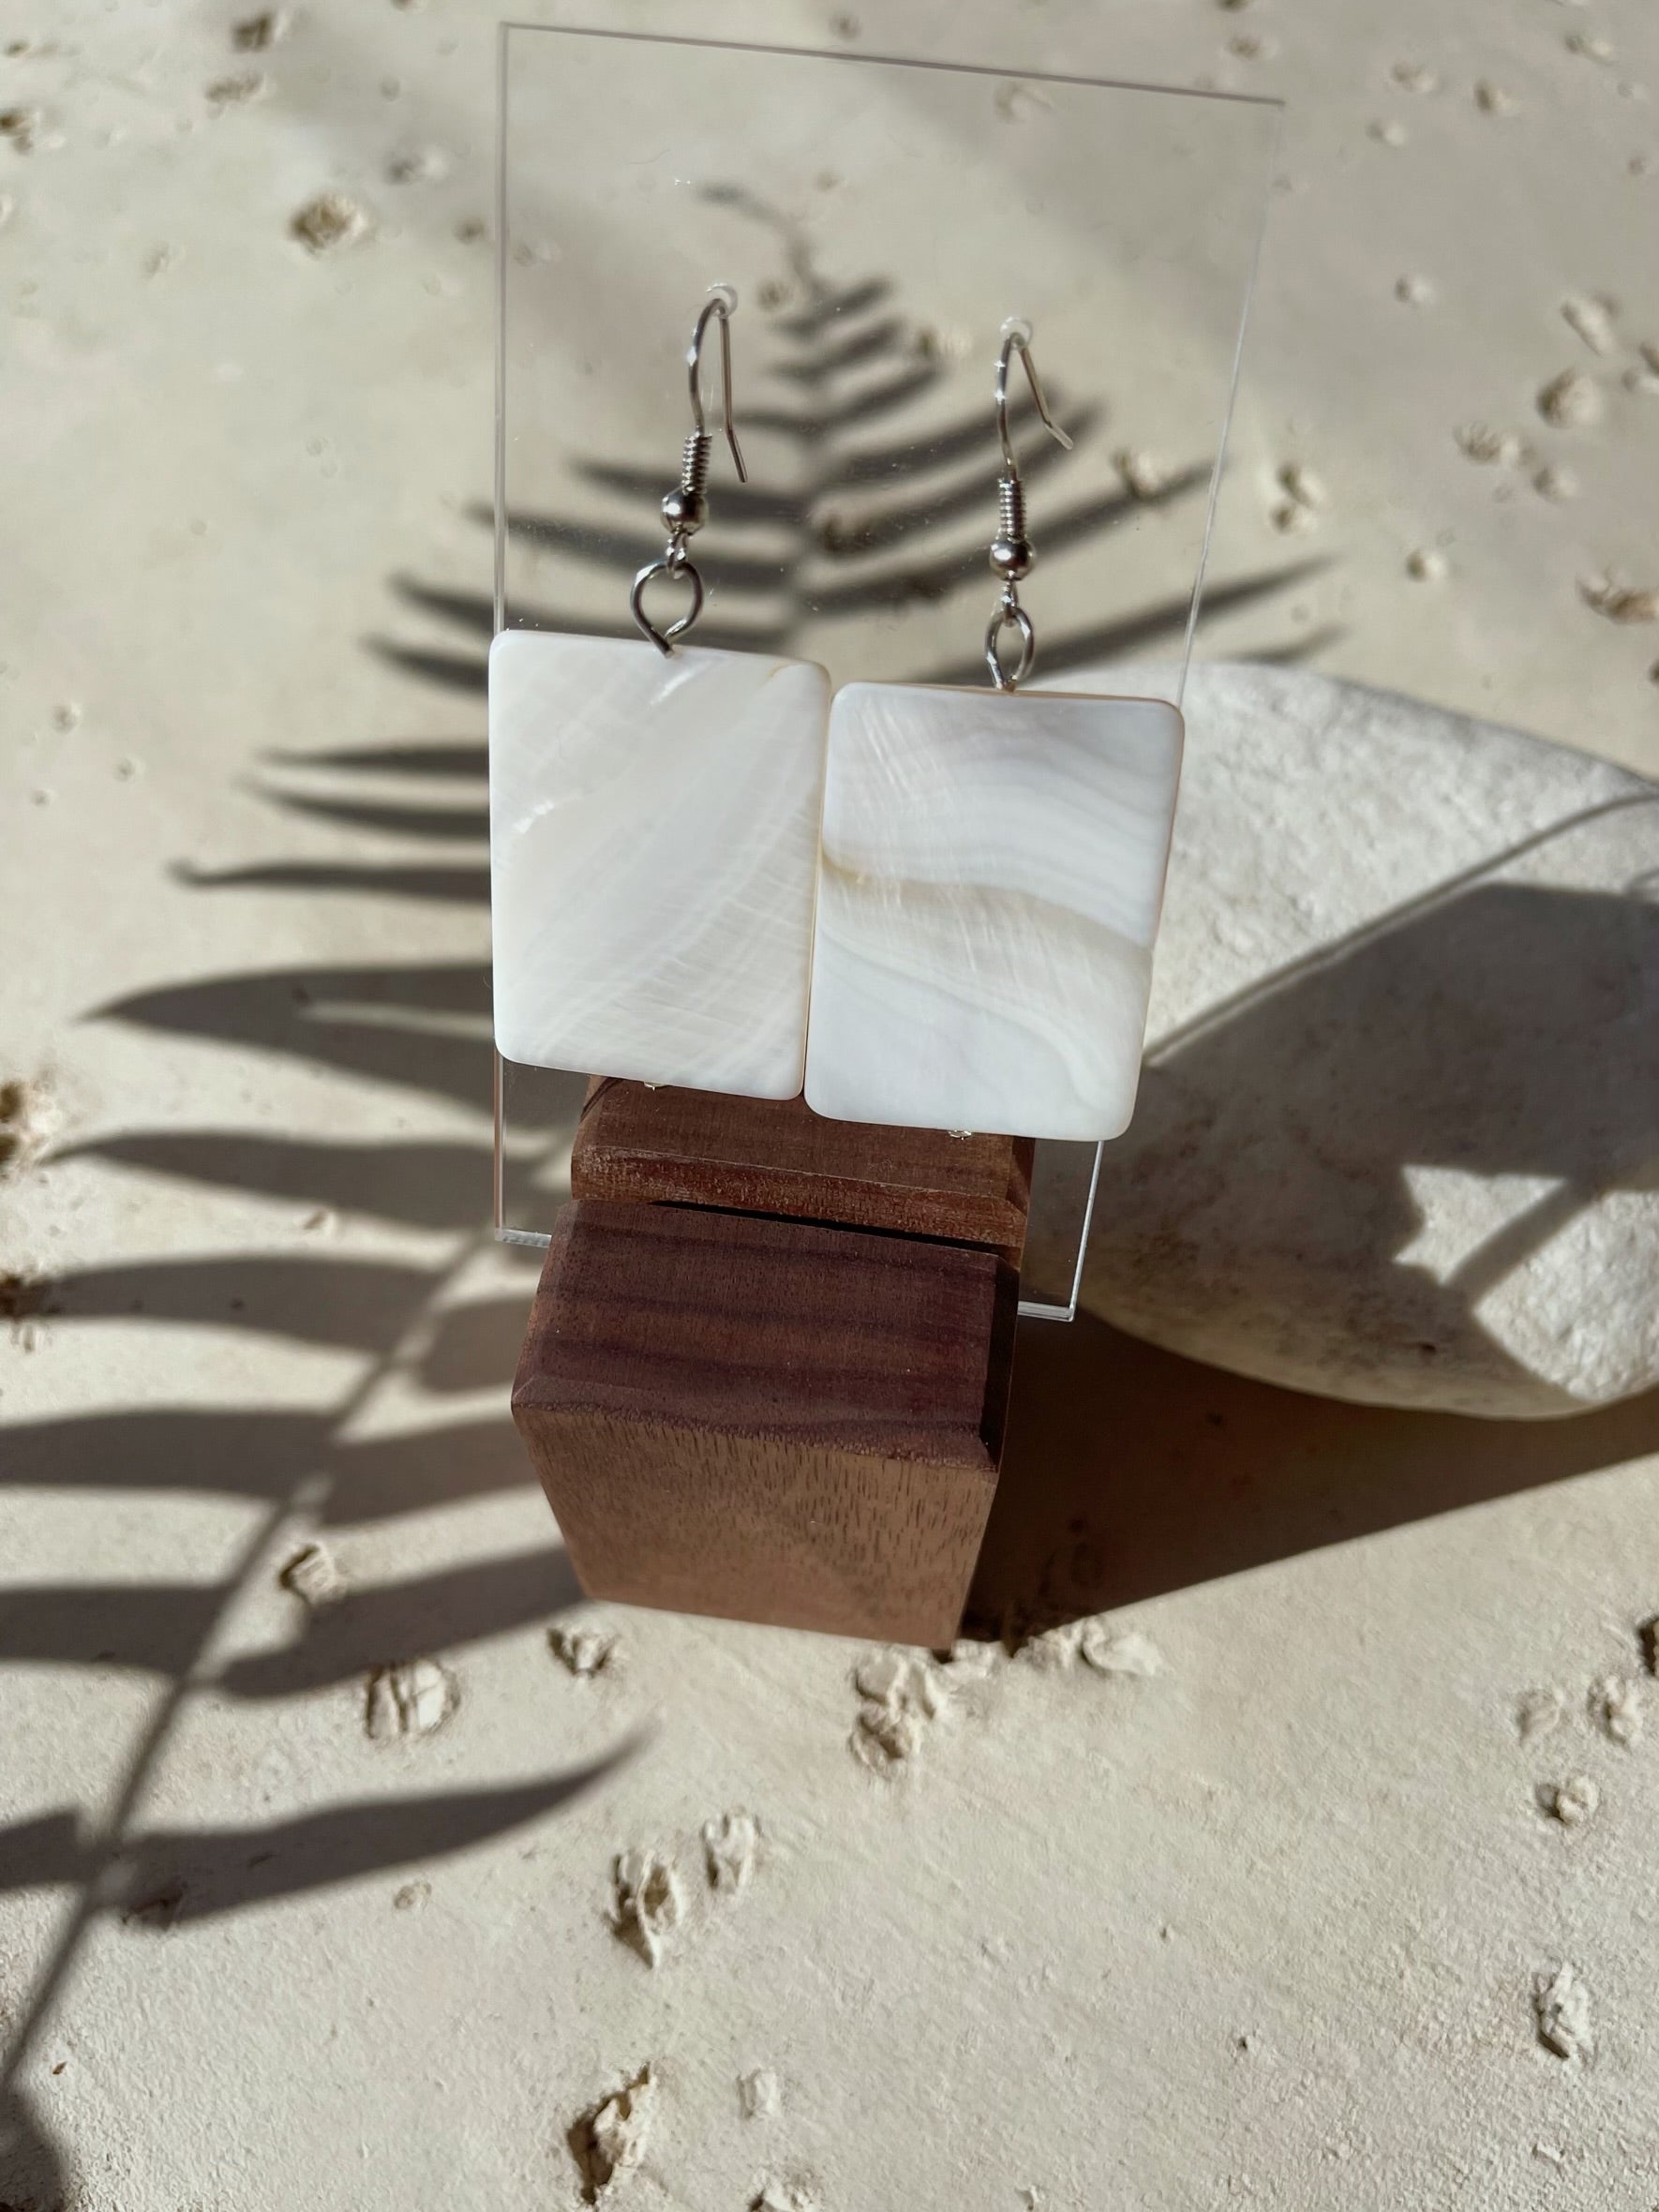 Nacre, Mother of pearl handcrafted Earrings